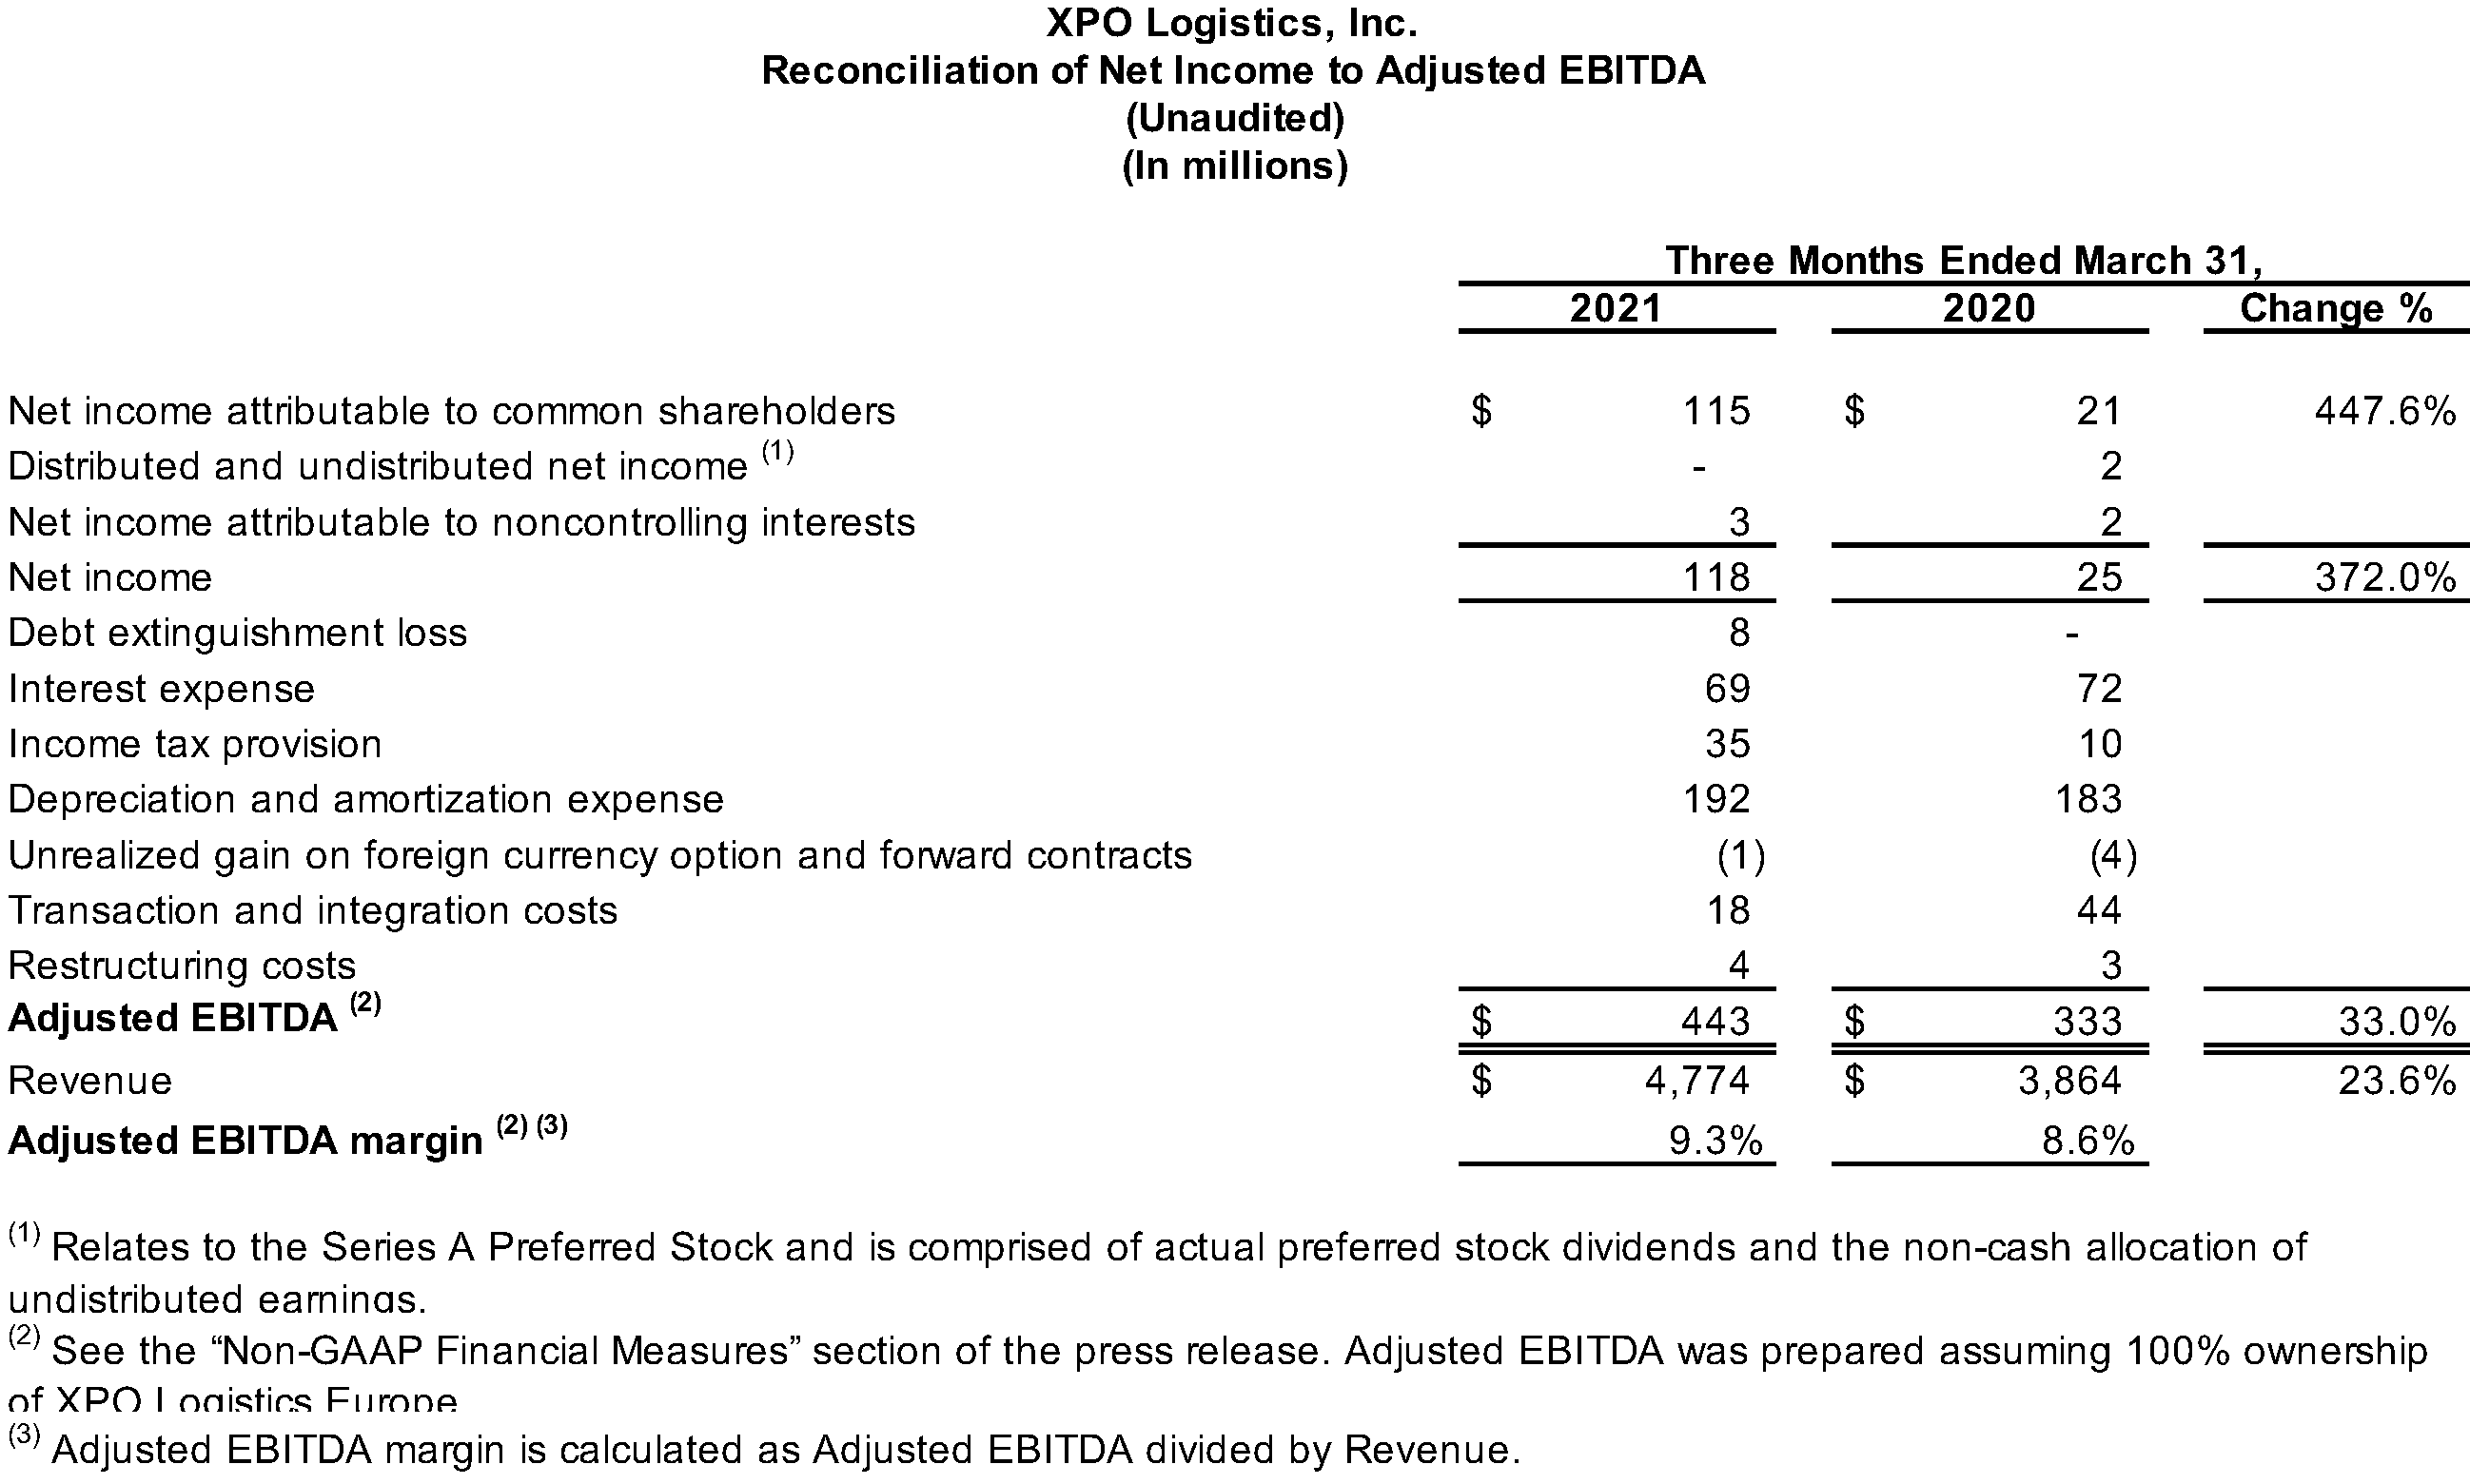 Reconciliation of Net Income to Adjusted EBITDA (Unaudited)